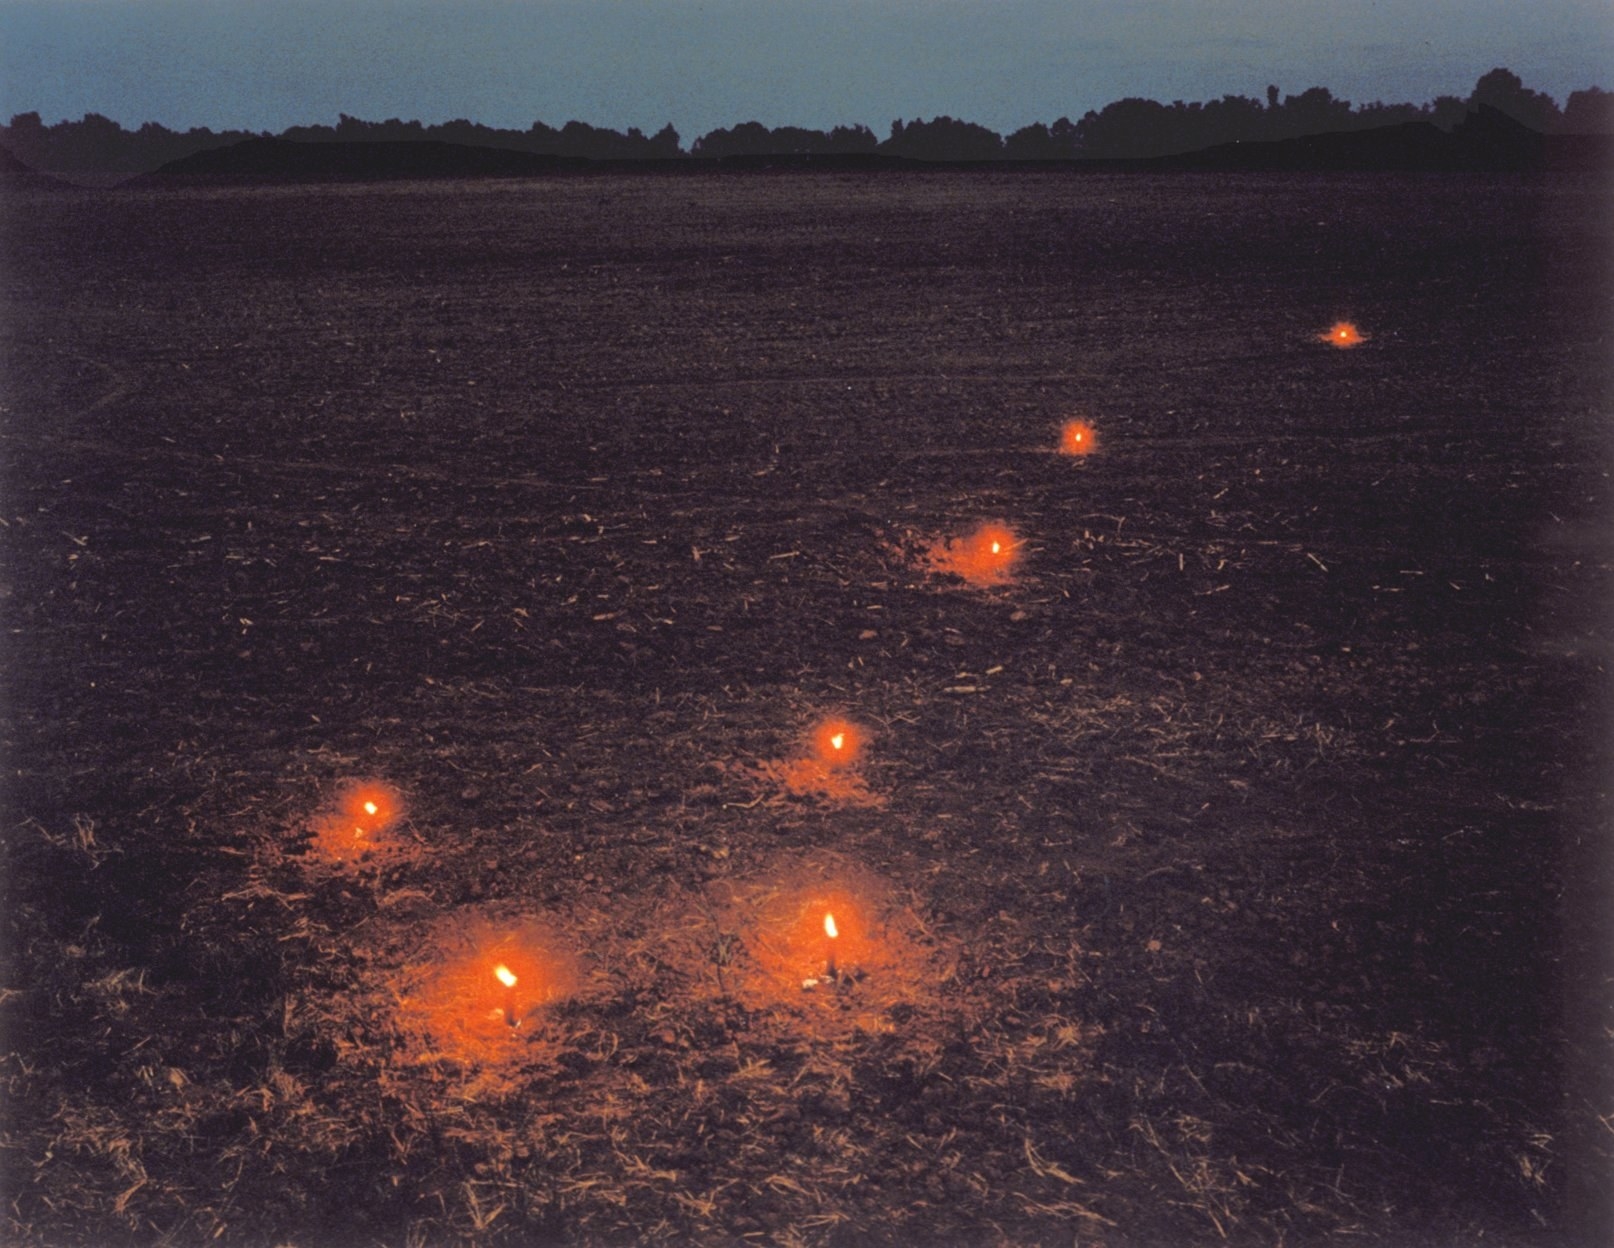 The Big Dipper is made with flares in a field 